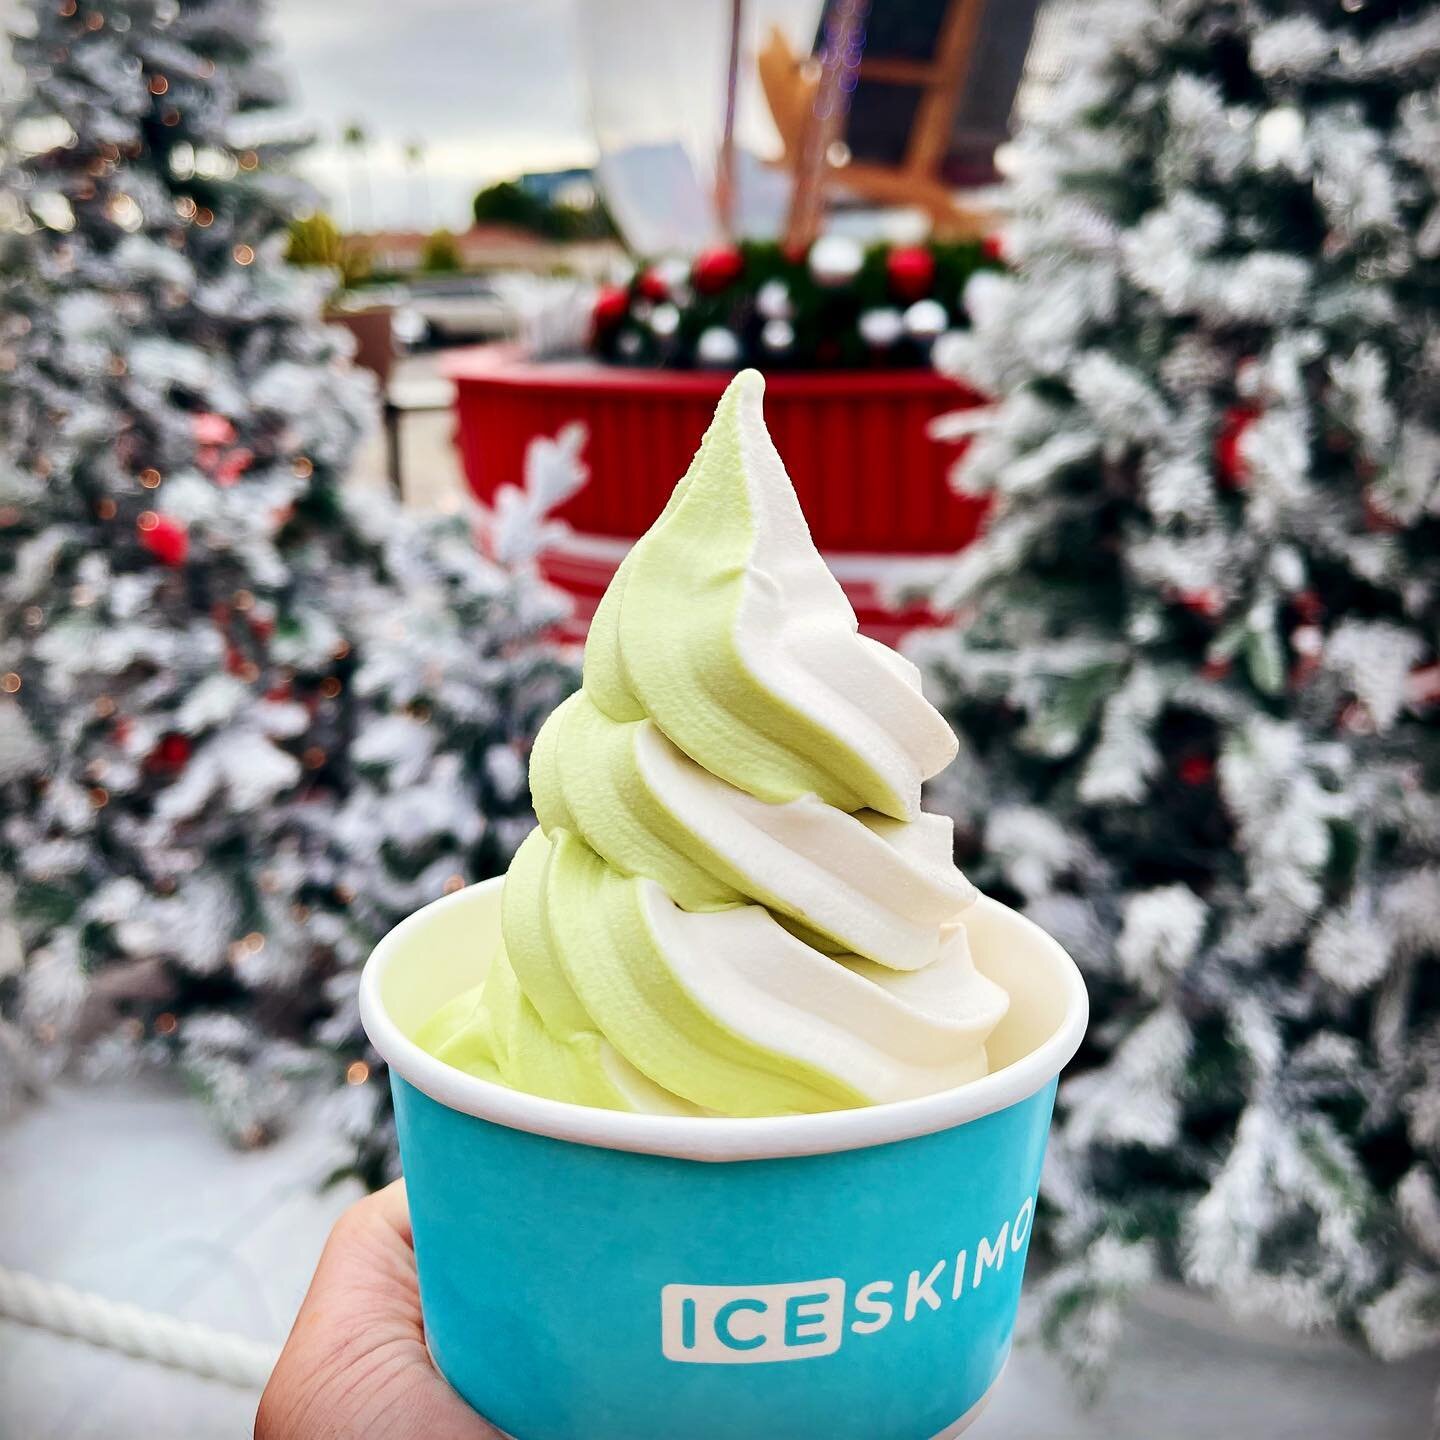 Matcha soft serve is back! (Del Mar only) Ask our talented staff to create a picture perfect Matcha Strawberry swirl 🍵🍓🍦